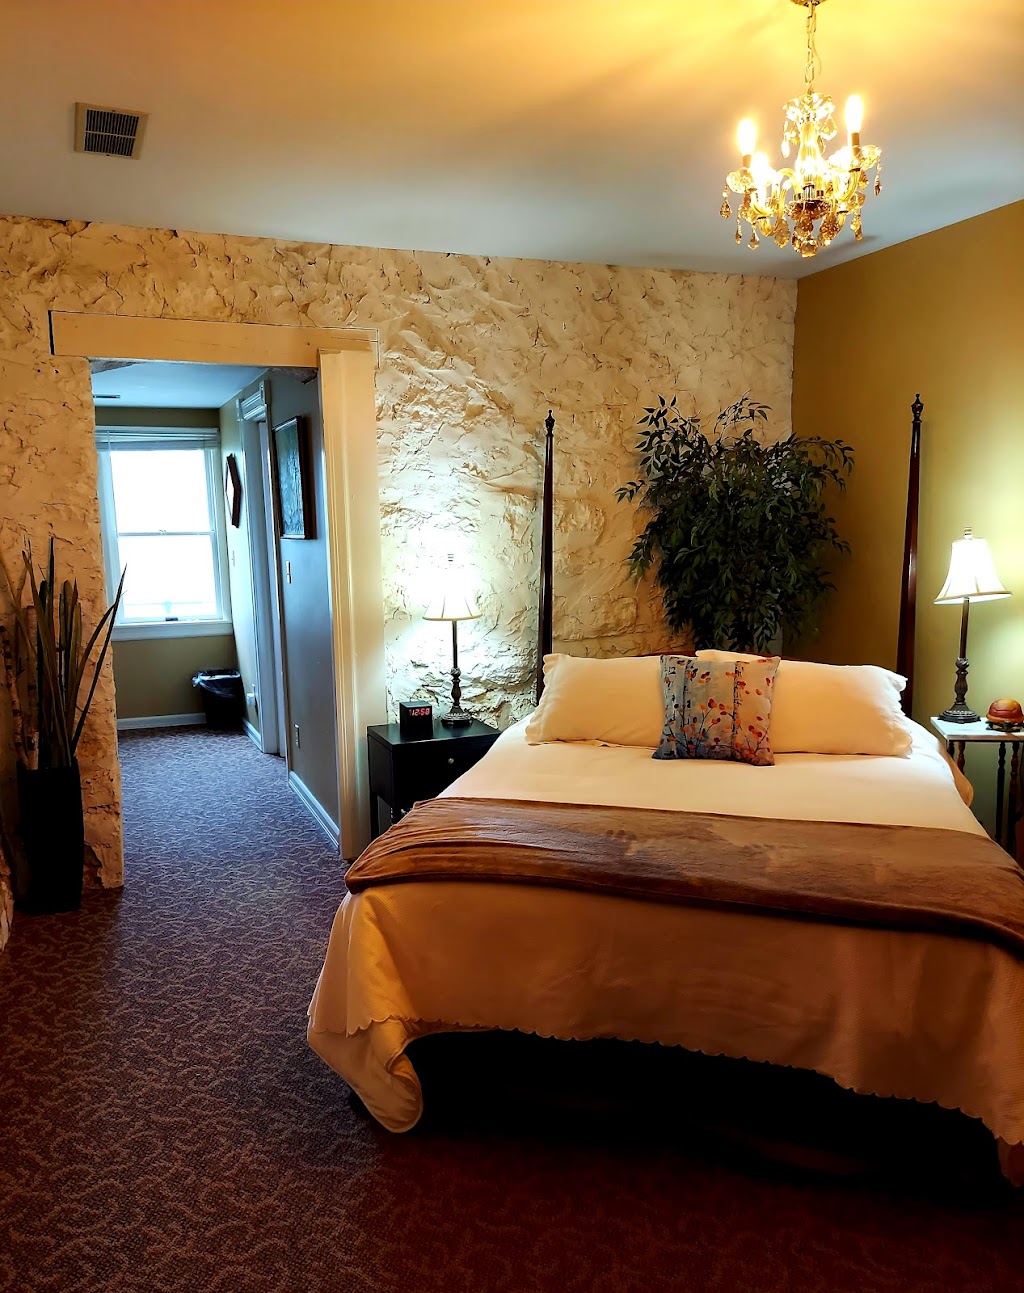 St. Croix Valley Inn (The Croix House) | 305 River St, Osceola, WI 54020 | Phone: (715) 494-1677